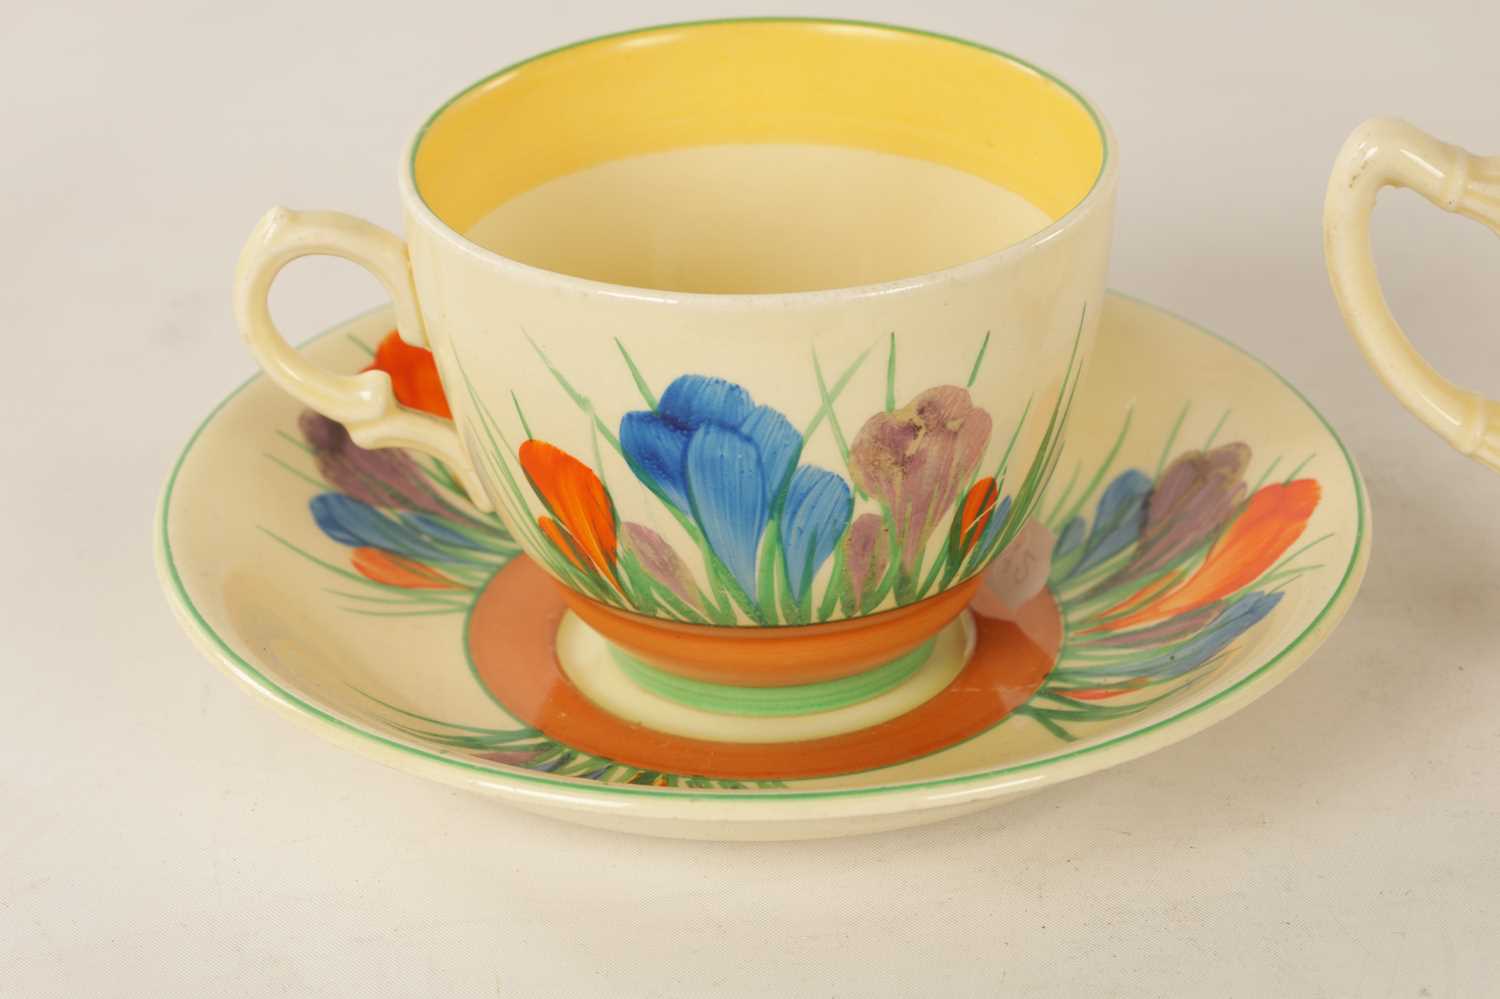 A COLLECTION OF CLARICE CLIFF “CROCUS” PATTERN POTTERY - Image 7 of 11